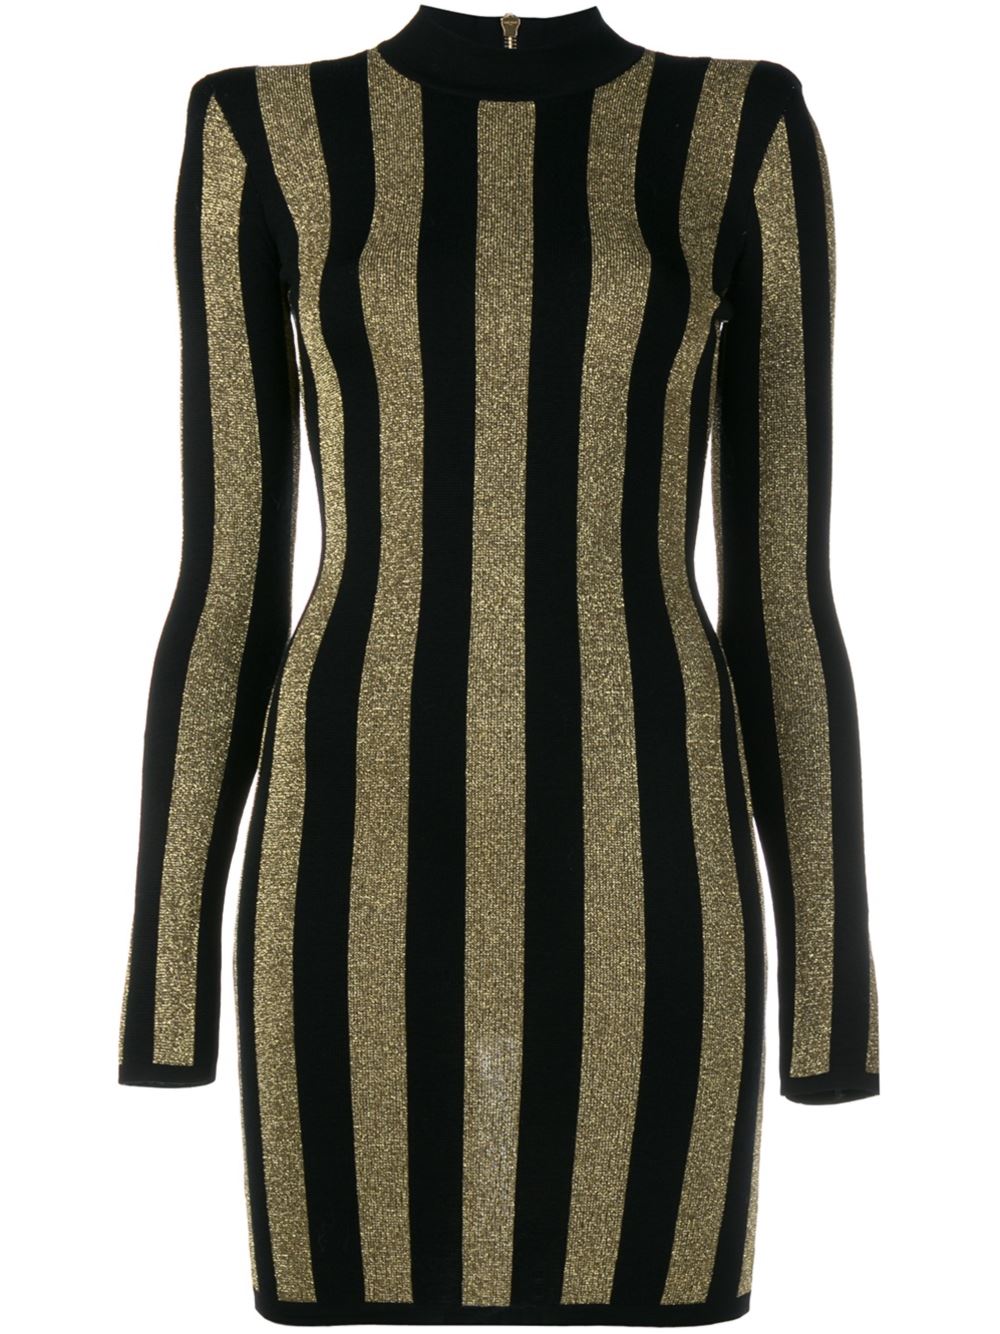 black and gold striped dress